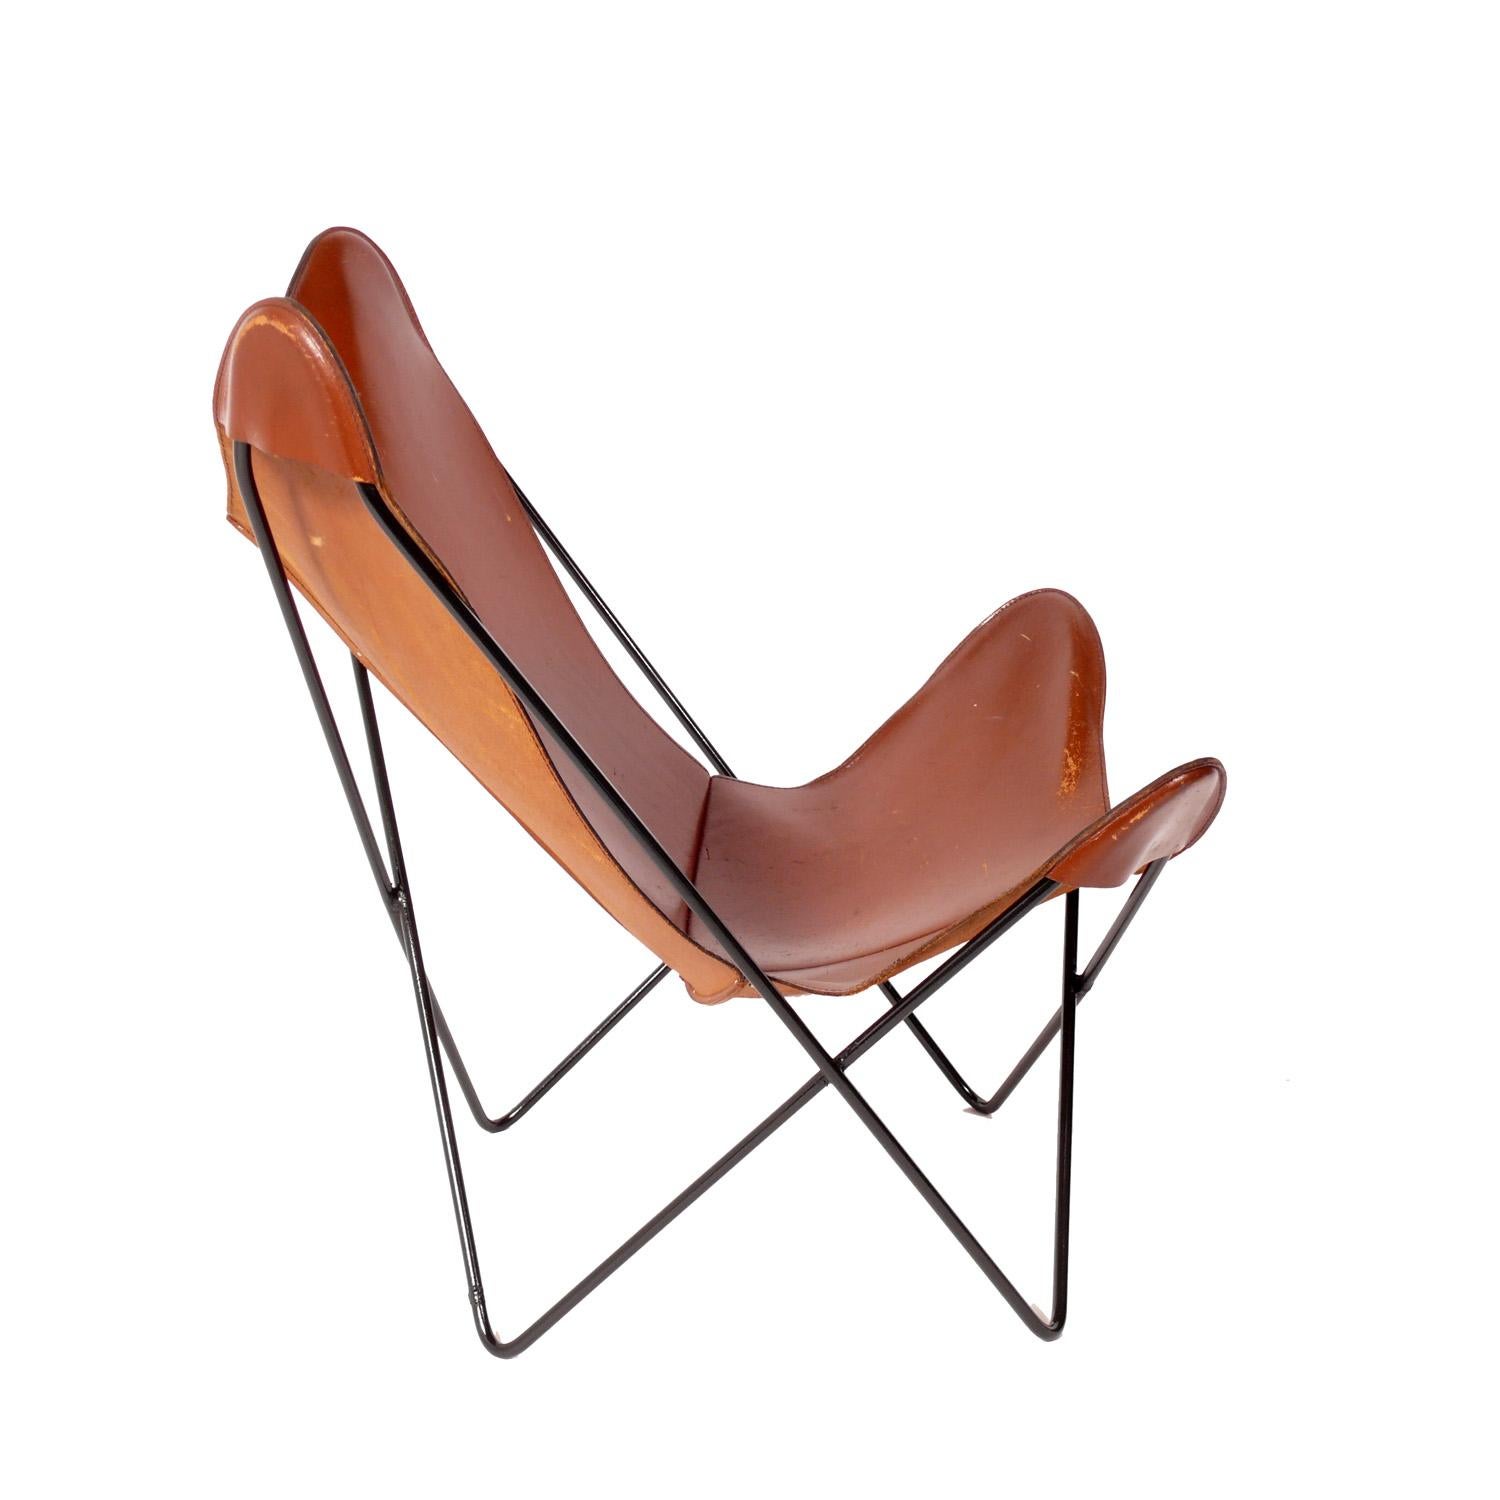 Sculptural leather butterfly lounge chair designed by Jorge Ferrari-Hardoy, circa 1960s. Rarely seen in the original cognac leather, this chair has a great patina that you only get with age. Broken in like your favorite baseball glove. The iron